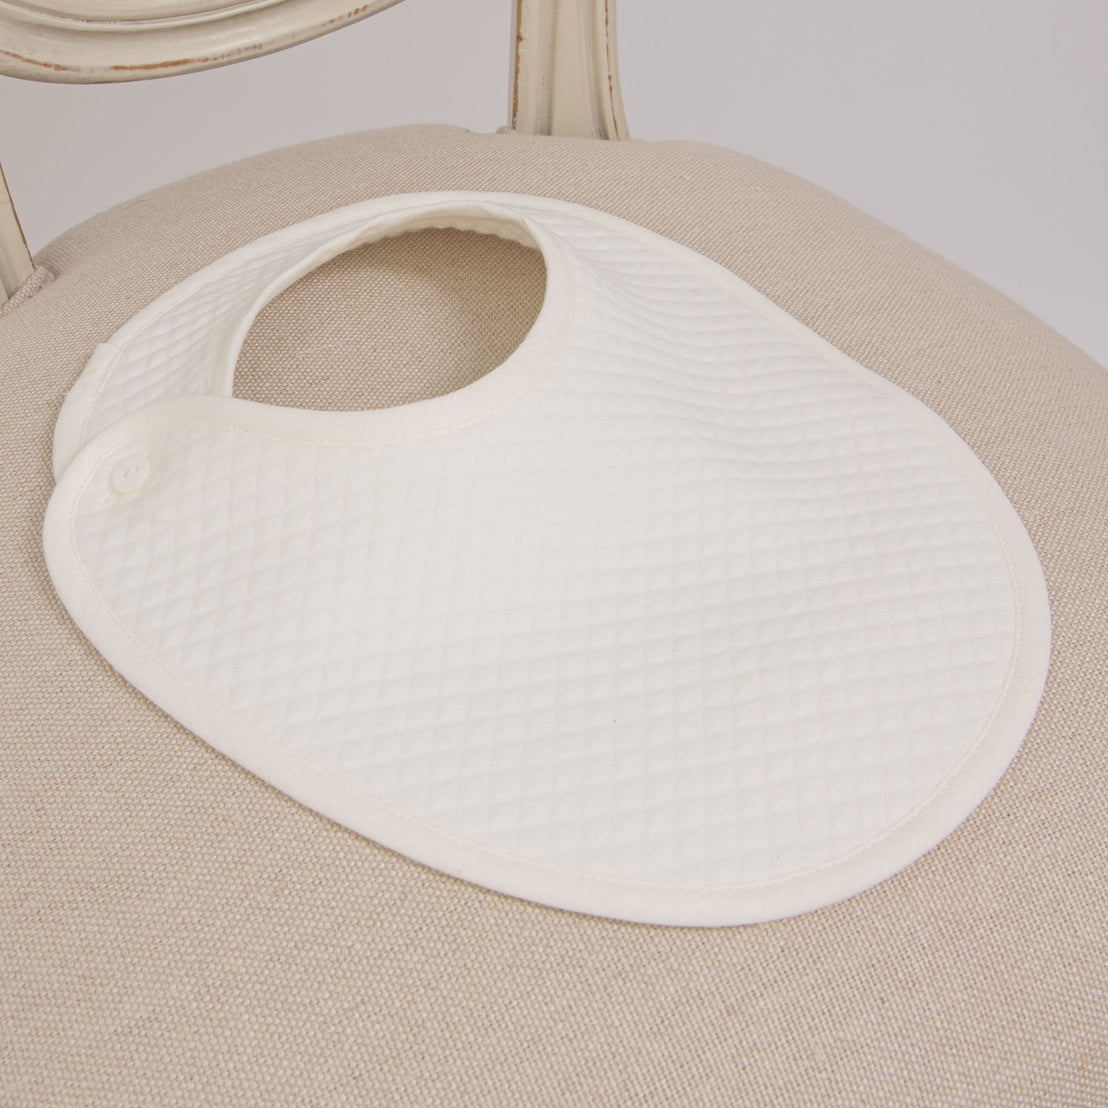 A Owen Romper Accessory Bundle -SAVE 15% with a subtle quilted design and a single button closure, perfect for an upscale christening, placed neatly on a vintage light beige upholstered chair.